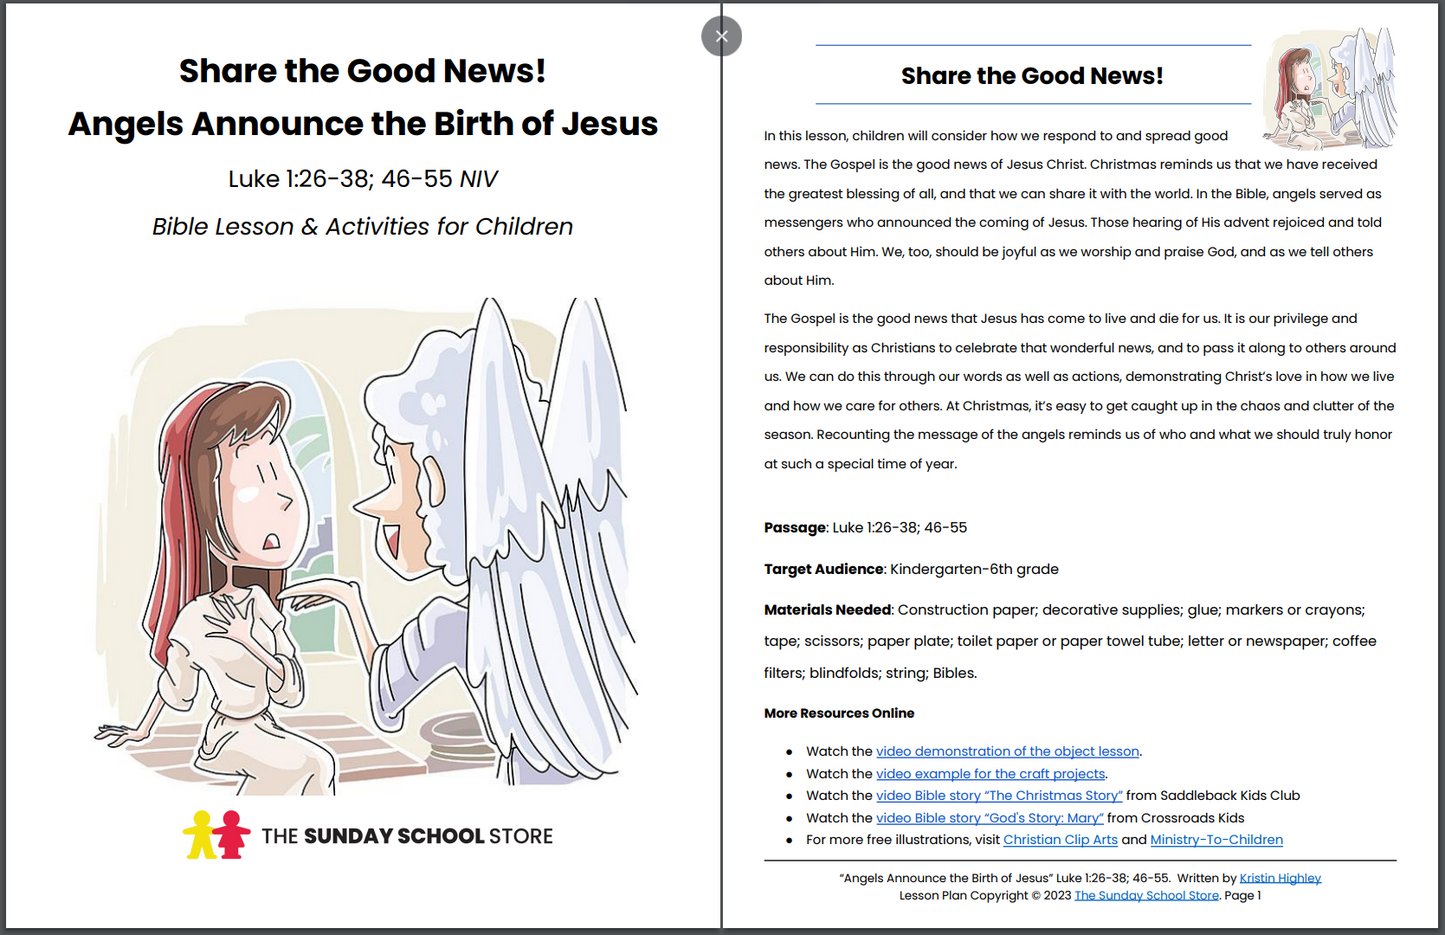 Angels Announce the Birth of Jesus (Luke 1:26-38; 46-55) Printable Bible Lesson & Sunday School Activities